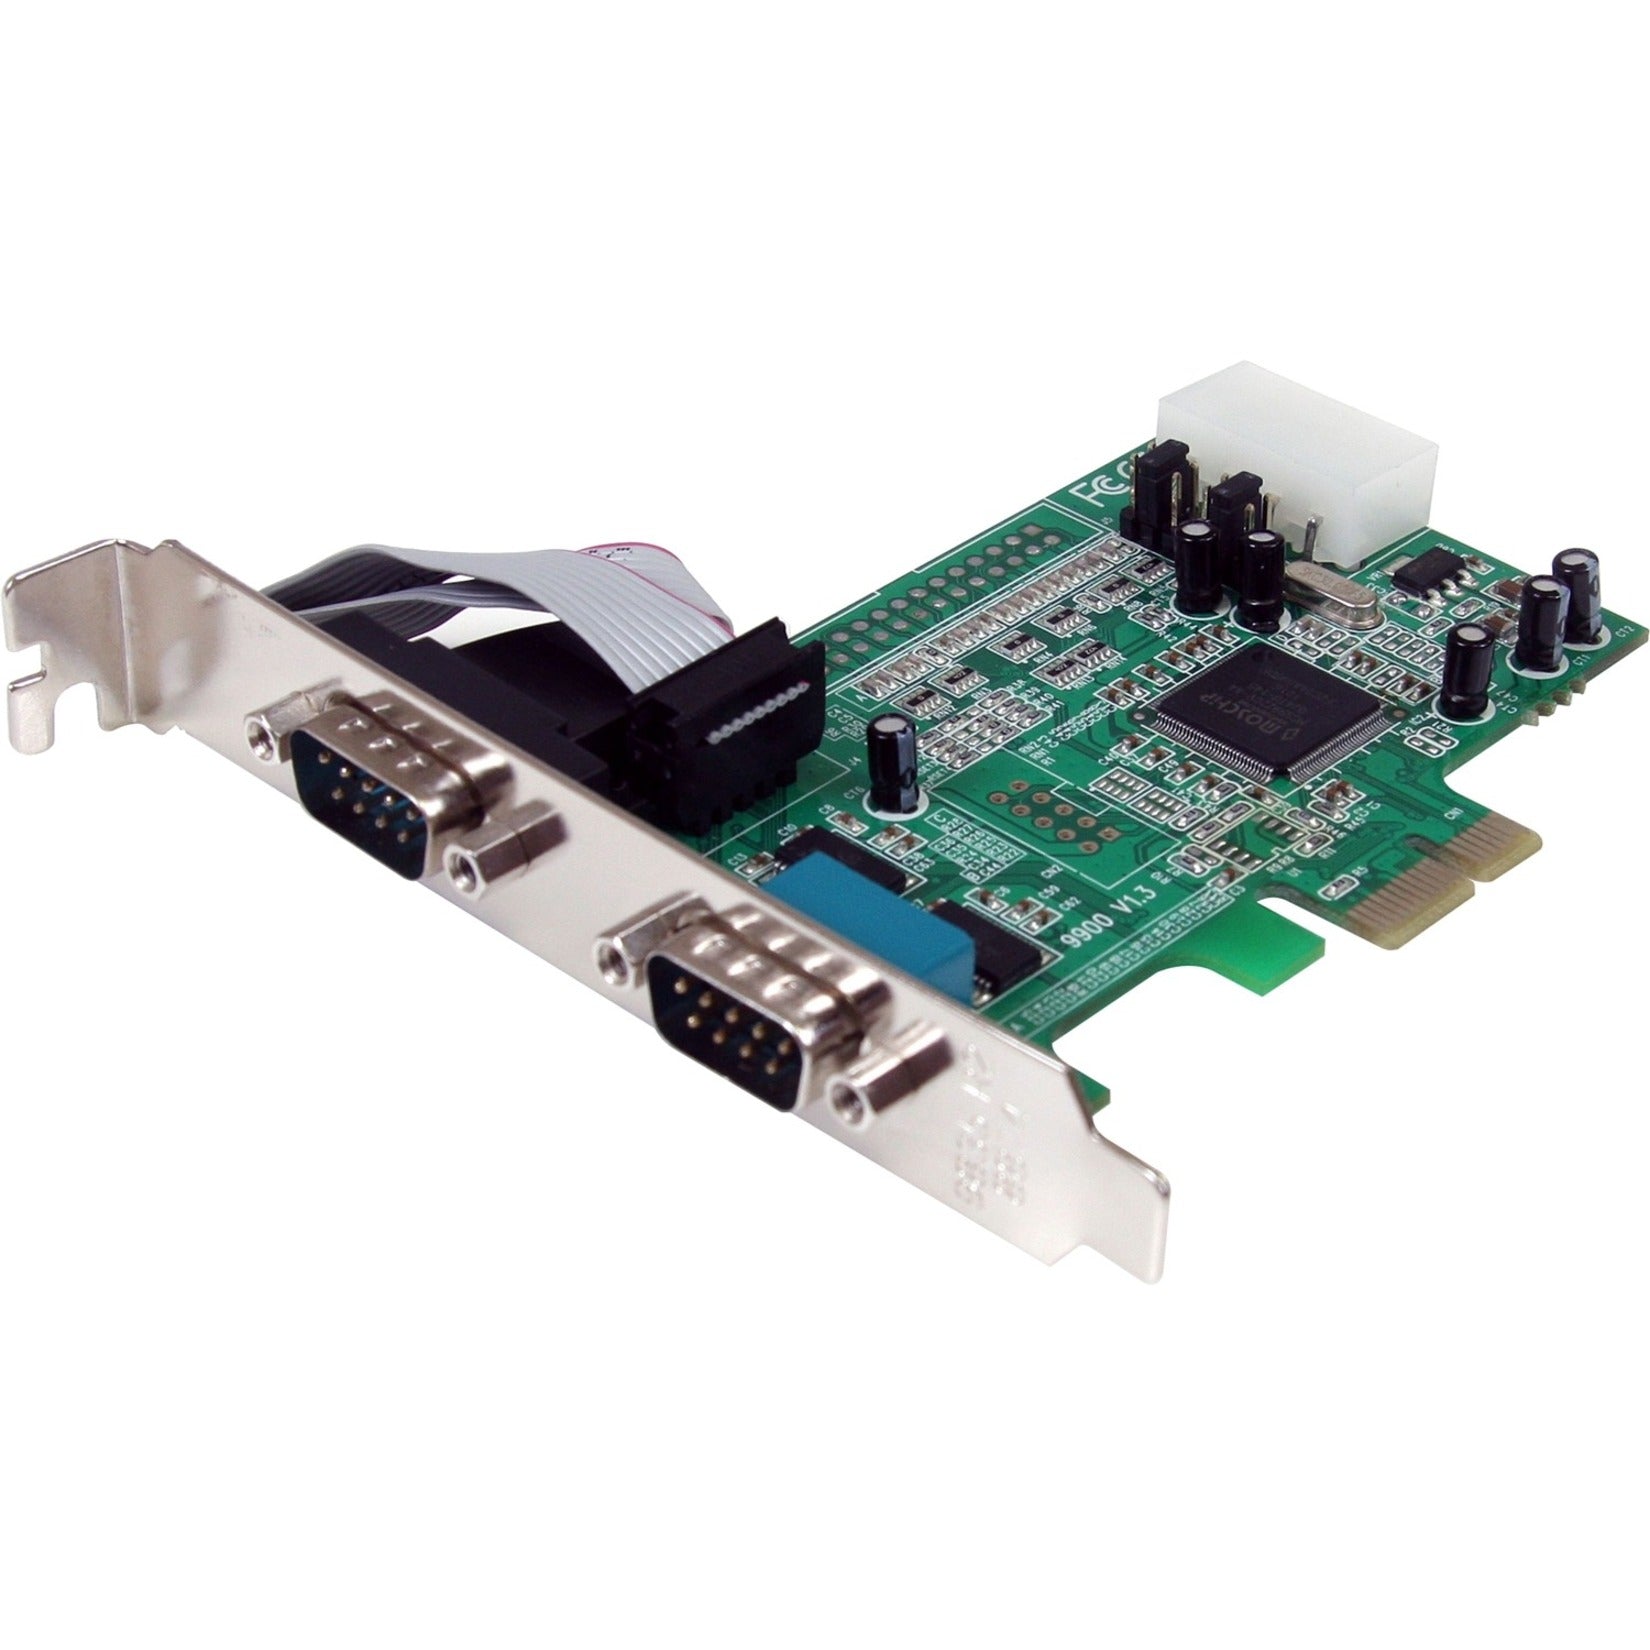 StarTech.com PEX2S553 2 Port PCIe Serial Adapter Card with 16550, Easy Installation, High Performance